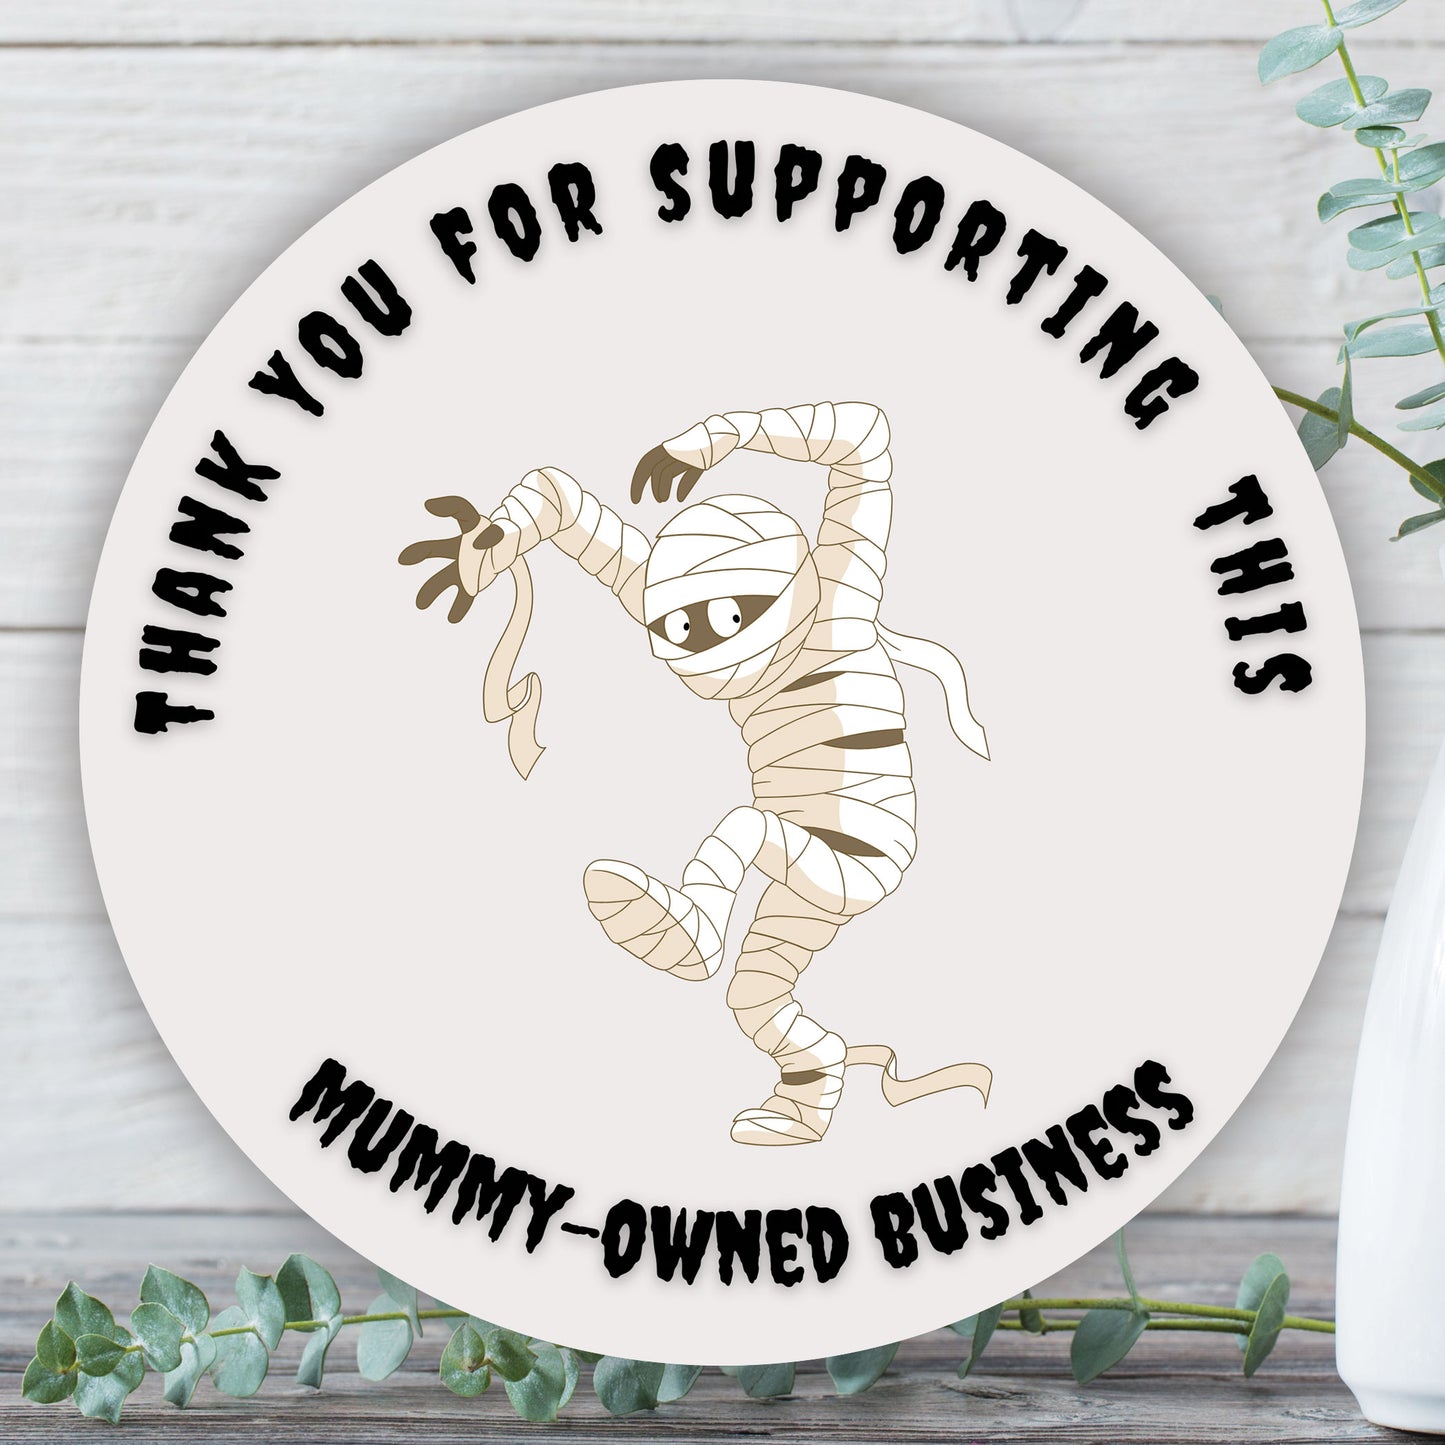 Thank You For Supporting This Mummy-Owned Business Sticker